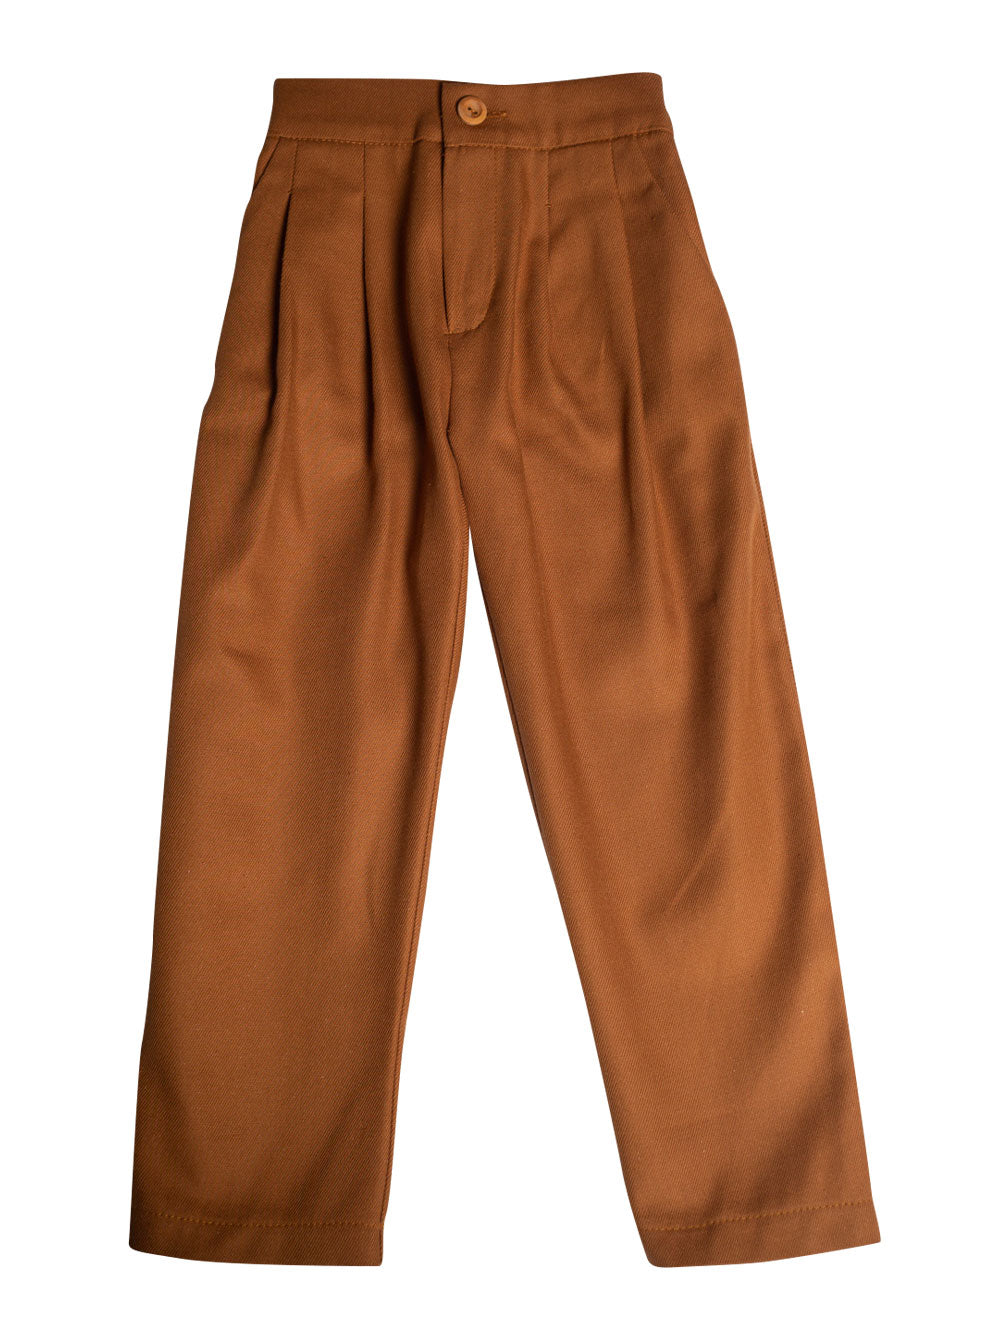 Toffee Twill Pants